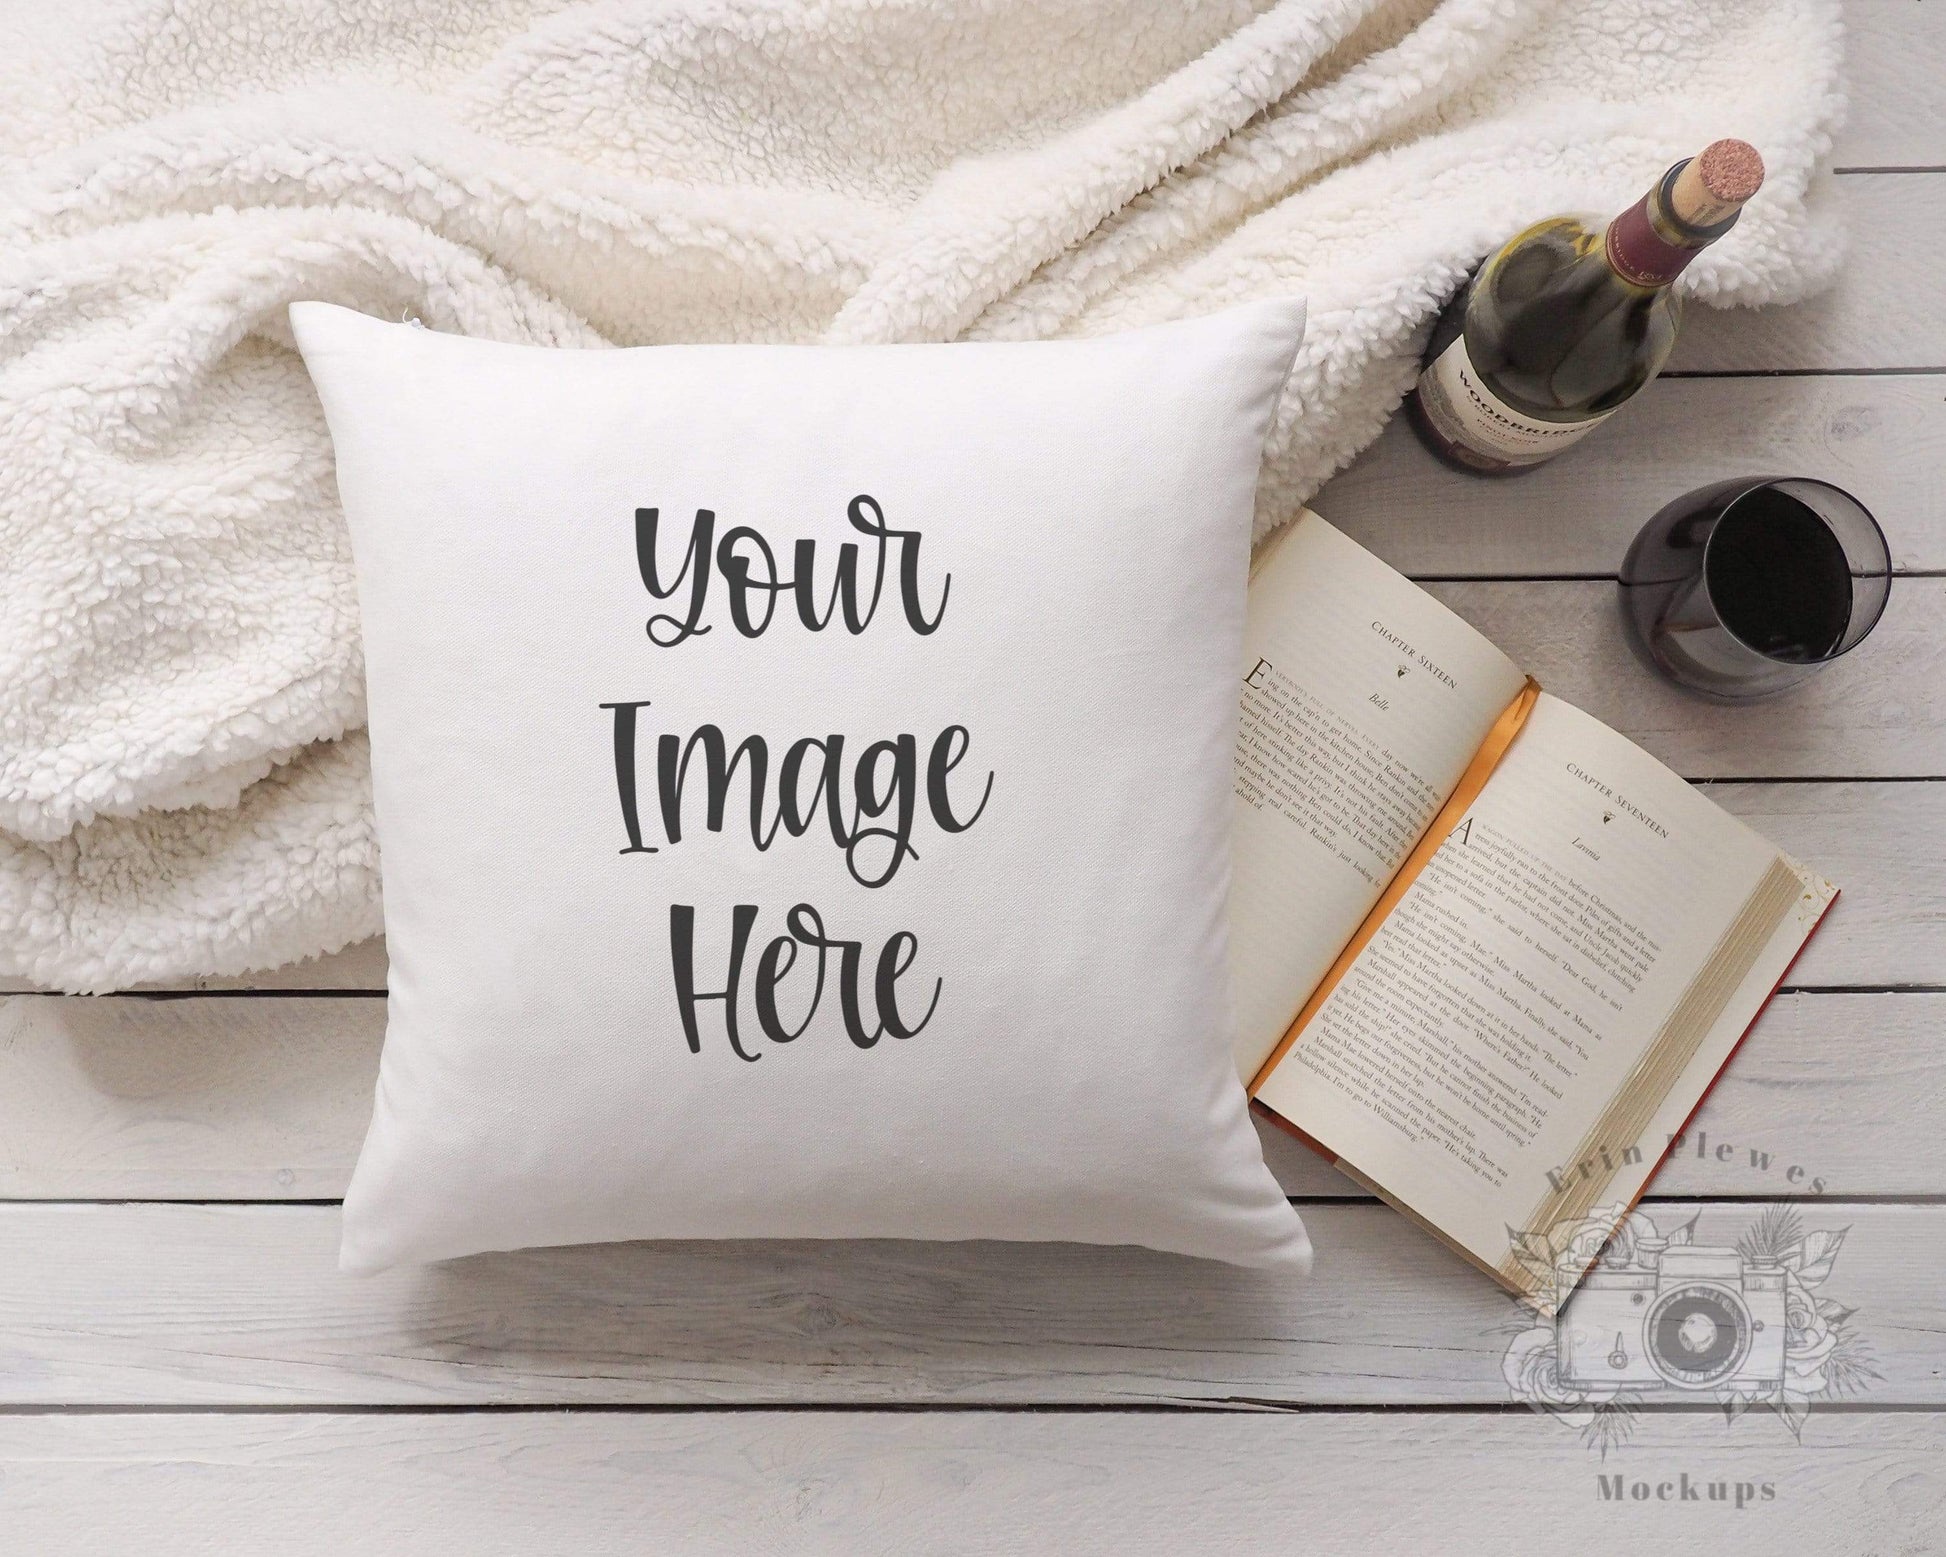 Erin Plewes Mockups Pillow Mockup, Square pillow mockup with blanket wine and book for lifestyle stock photography, White pillow mock up jpeg digital download